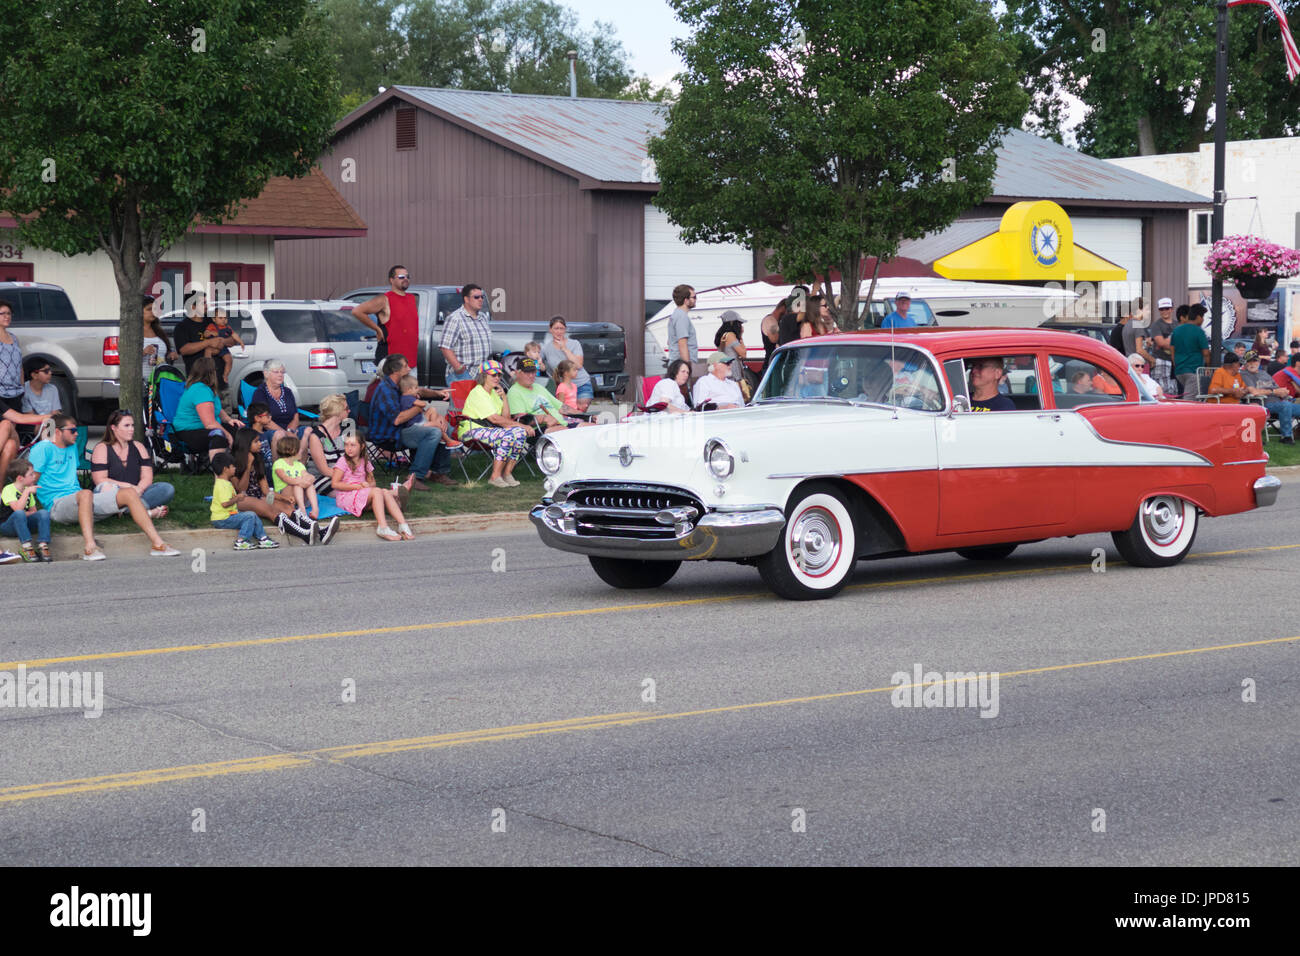 Restored 1955 Oldsmobile 88 participates in the 2017 annual Cruz-In parade for antique and vintage cars and trucks in Montague, Michigan. Stock Photo